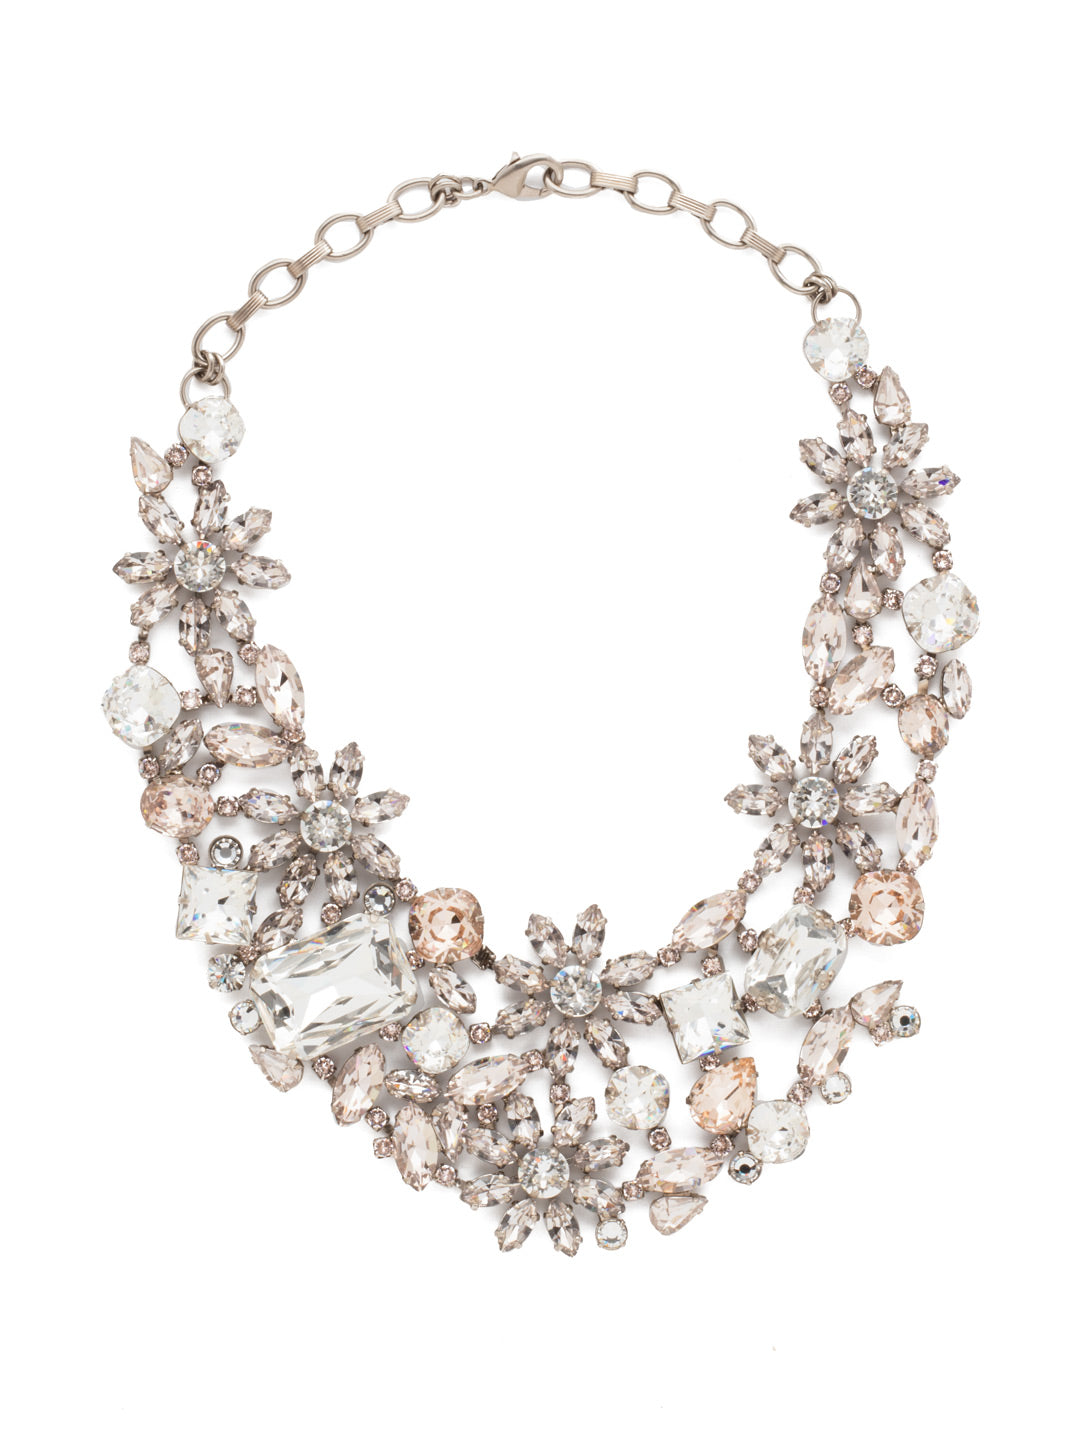 Floral Collar Statement Necklace - NBT56ASPLS - <p>Make a Statement with this floral patterned stunner that's sure to turn heads! From Sorrelli's Soft Petal collection in our Antique Silver-tone finish.</p>